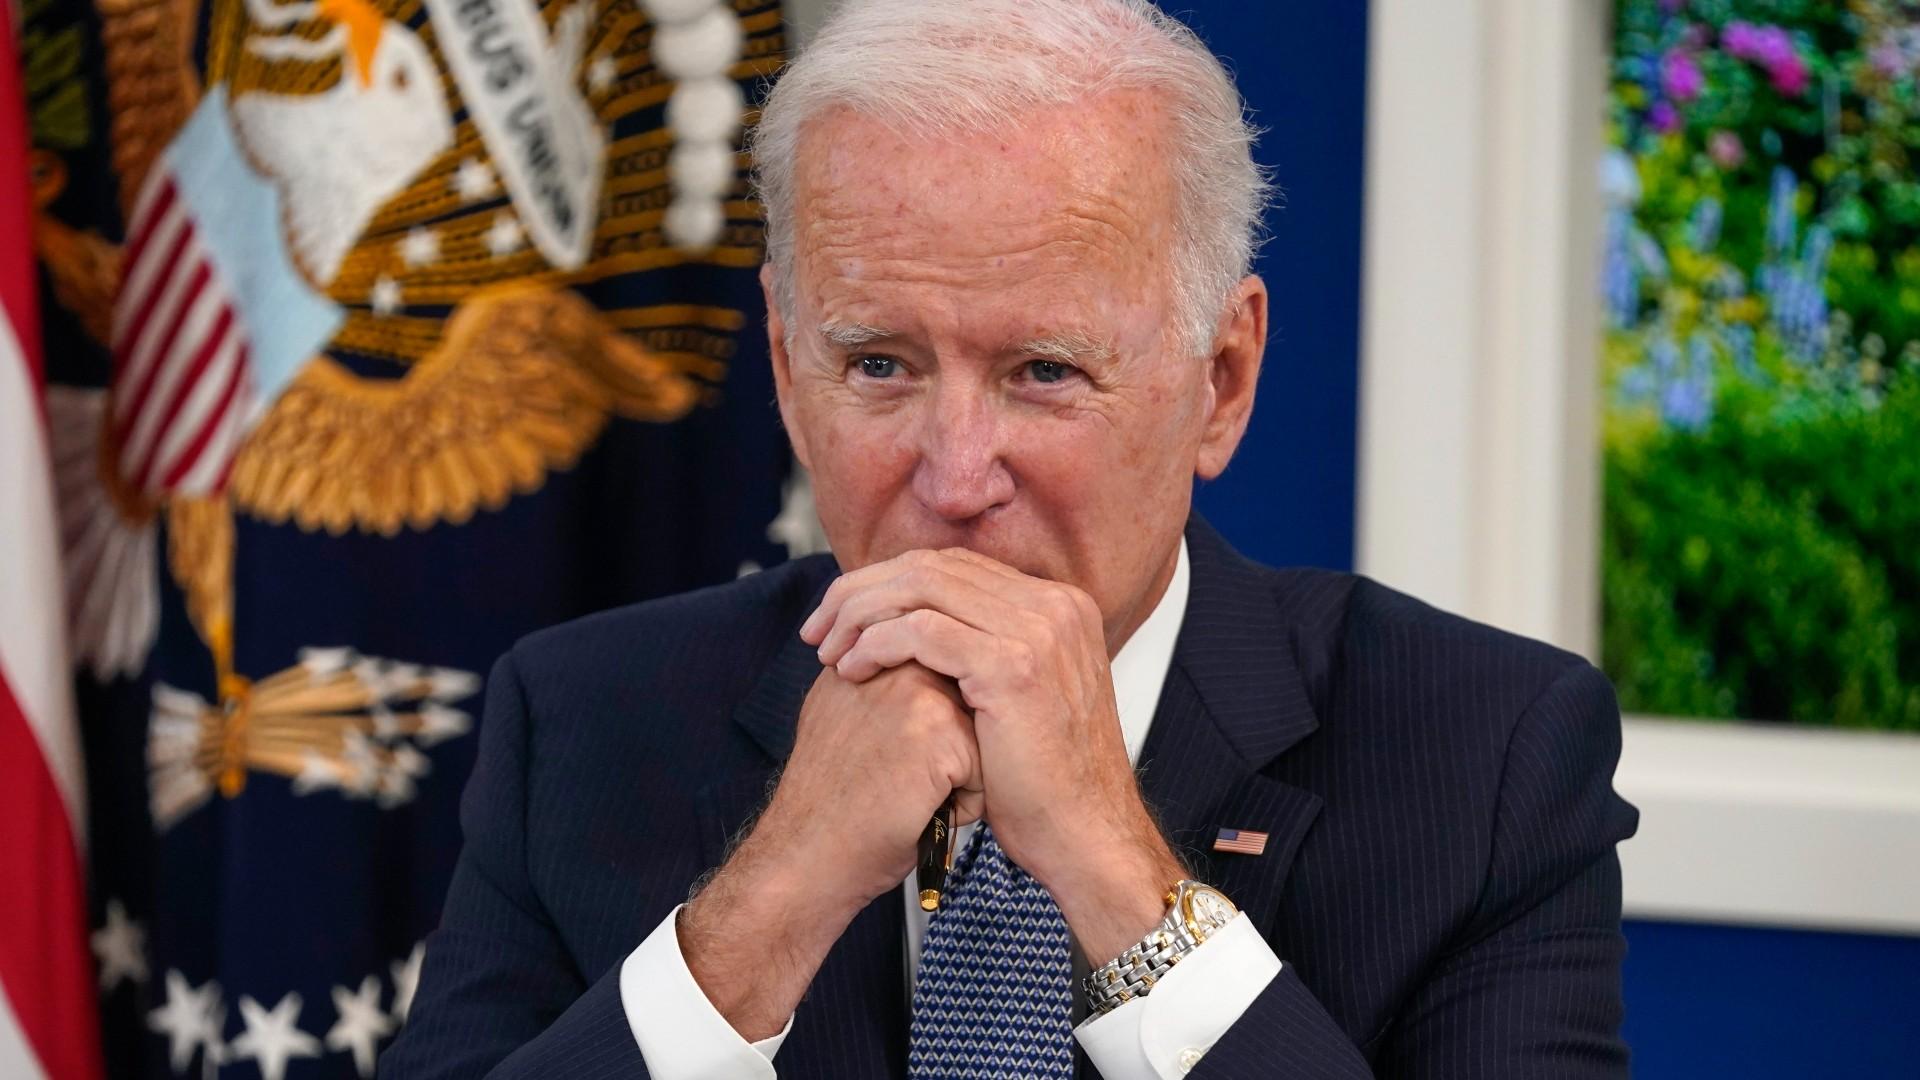 President Joe Biden listens during a meeting with business leaders about the debt limit in the South Court auditorium on the White House campus on Wednesday, October 6, 2021, in Washington.  (AP Photo / Evan Vucci)